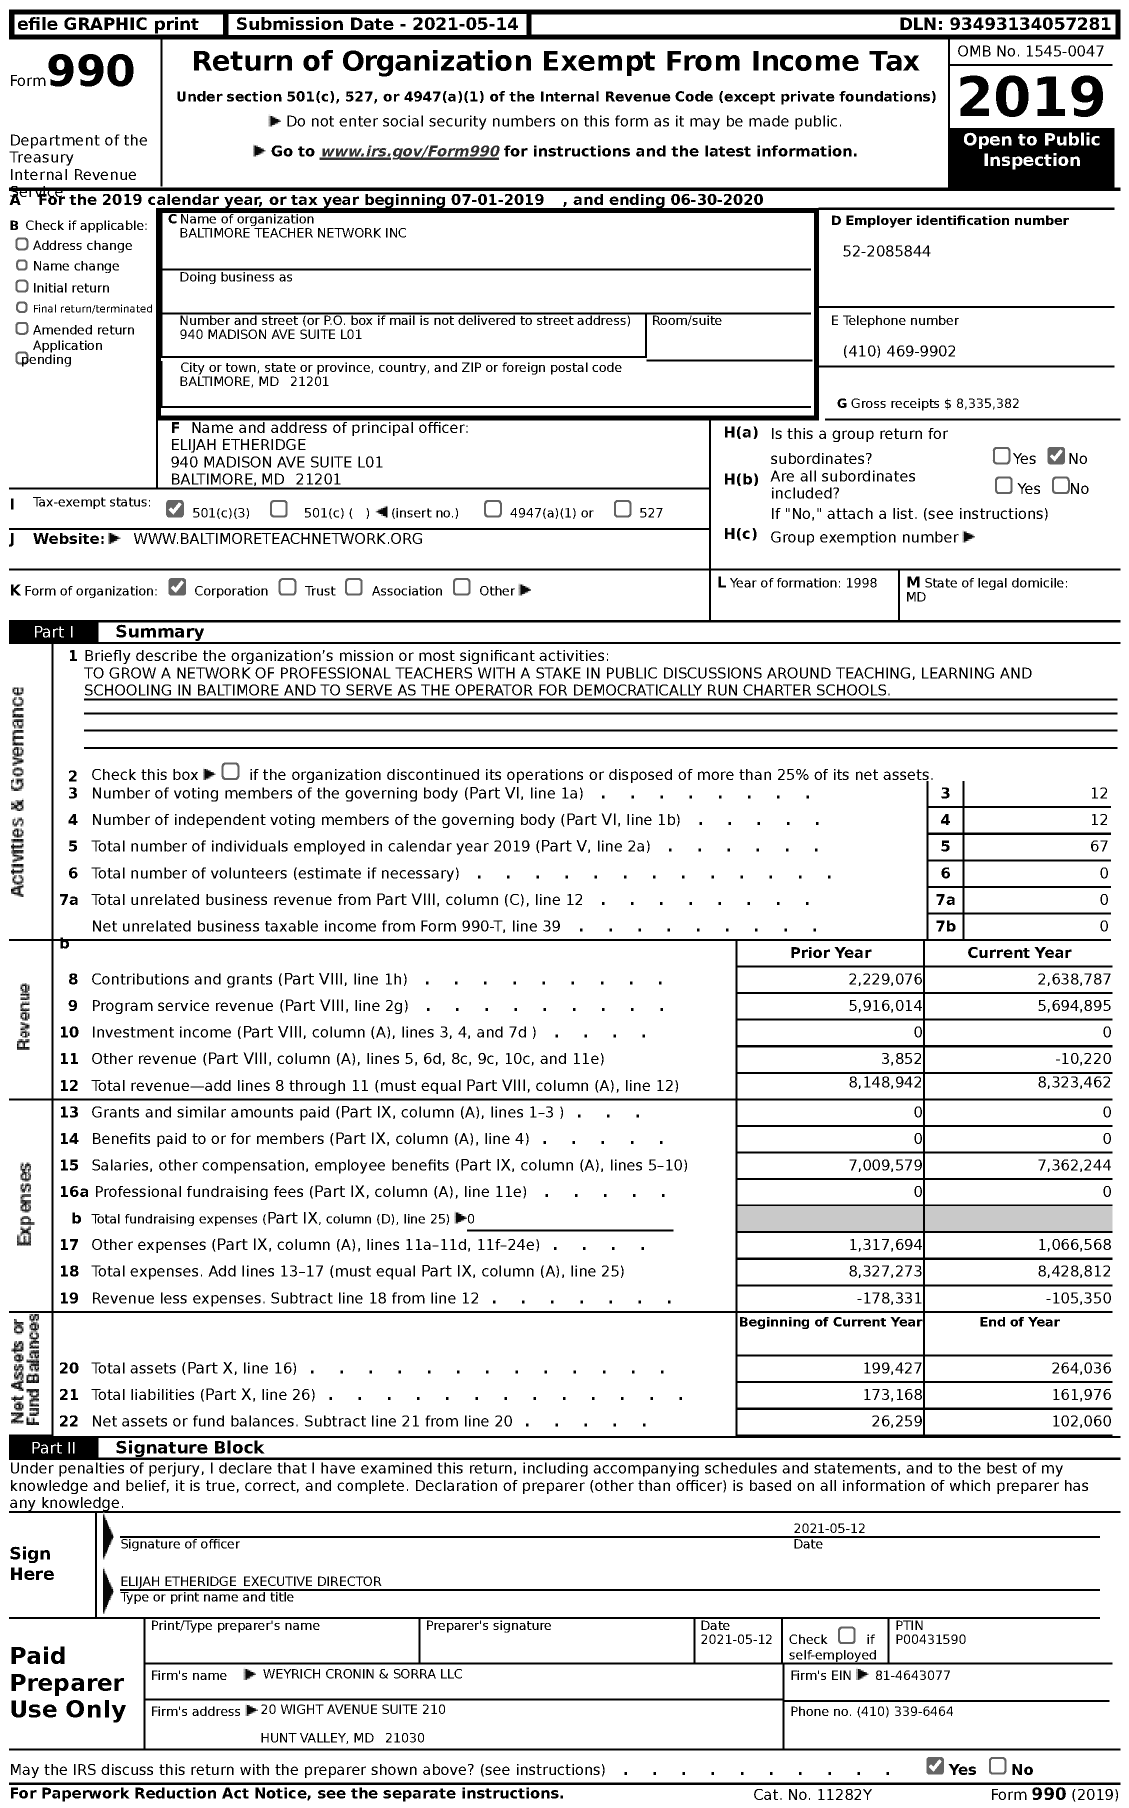 Image of first page of 2019 Form 990 for Baltimore Teacher Network (BTN)